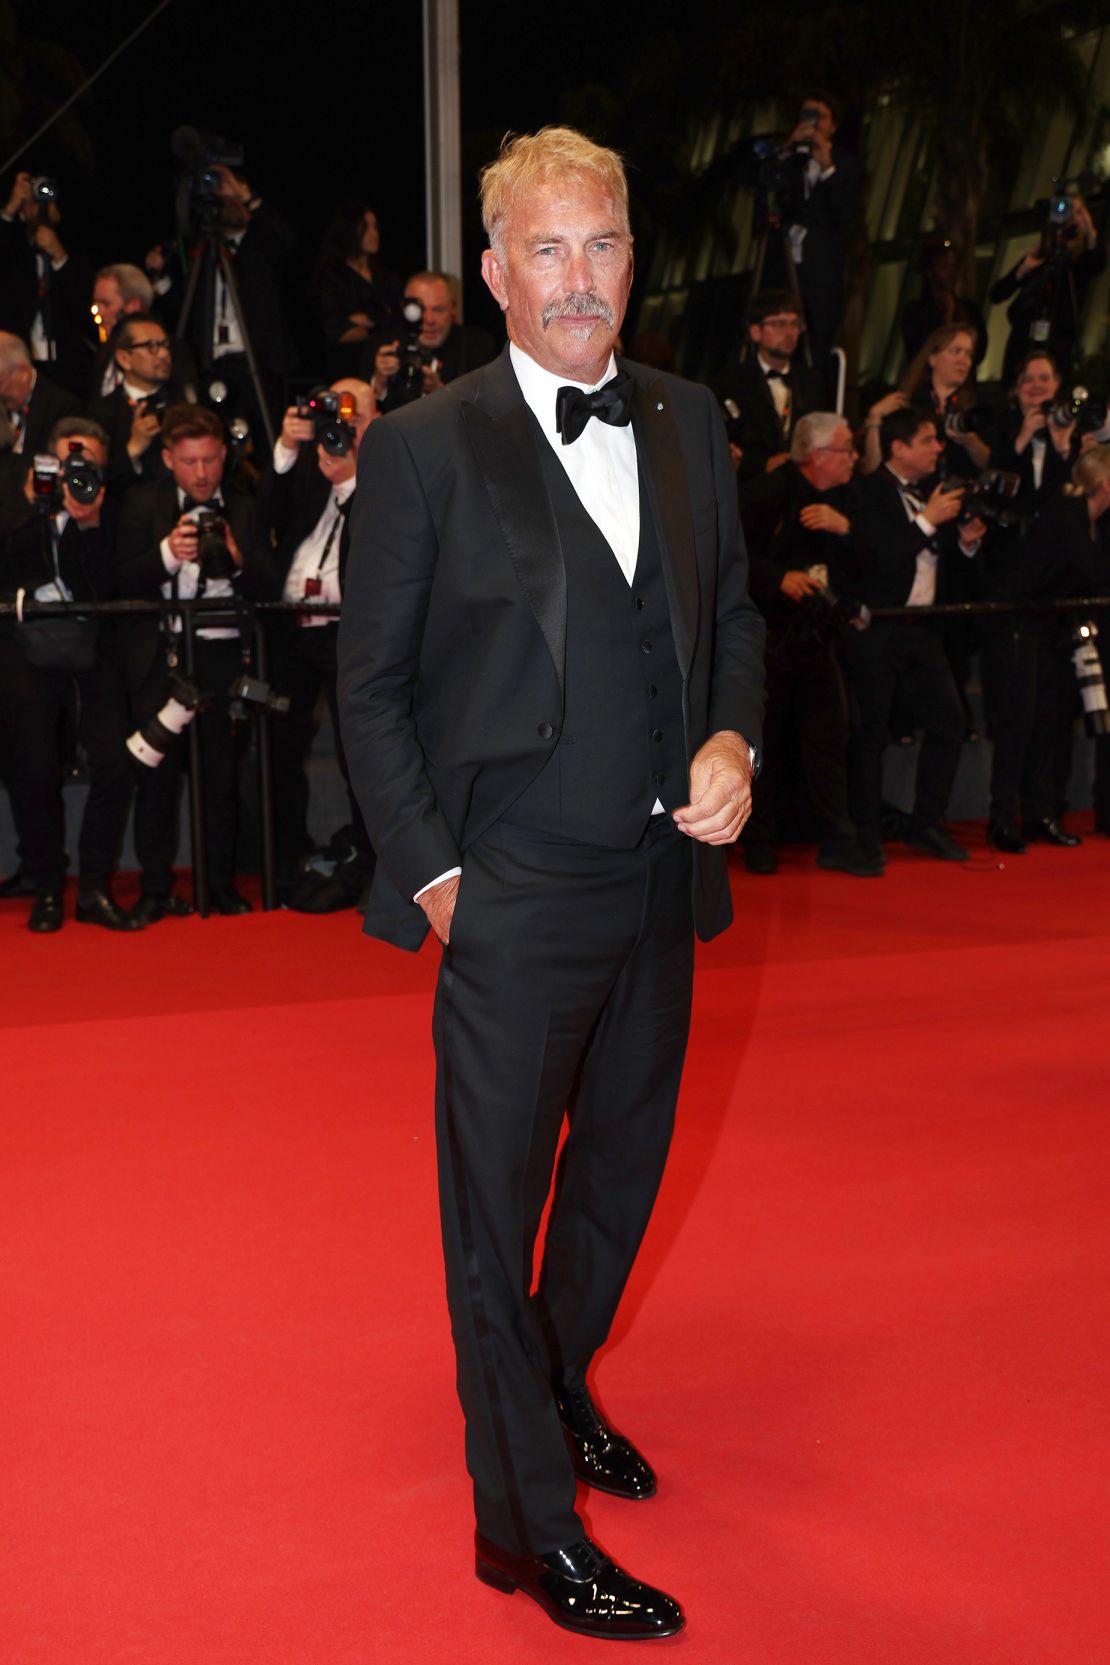 Kevin Costner in a three-piece tuxedo on May 19.